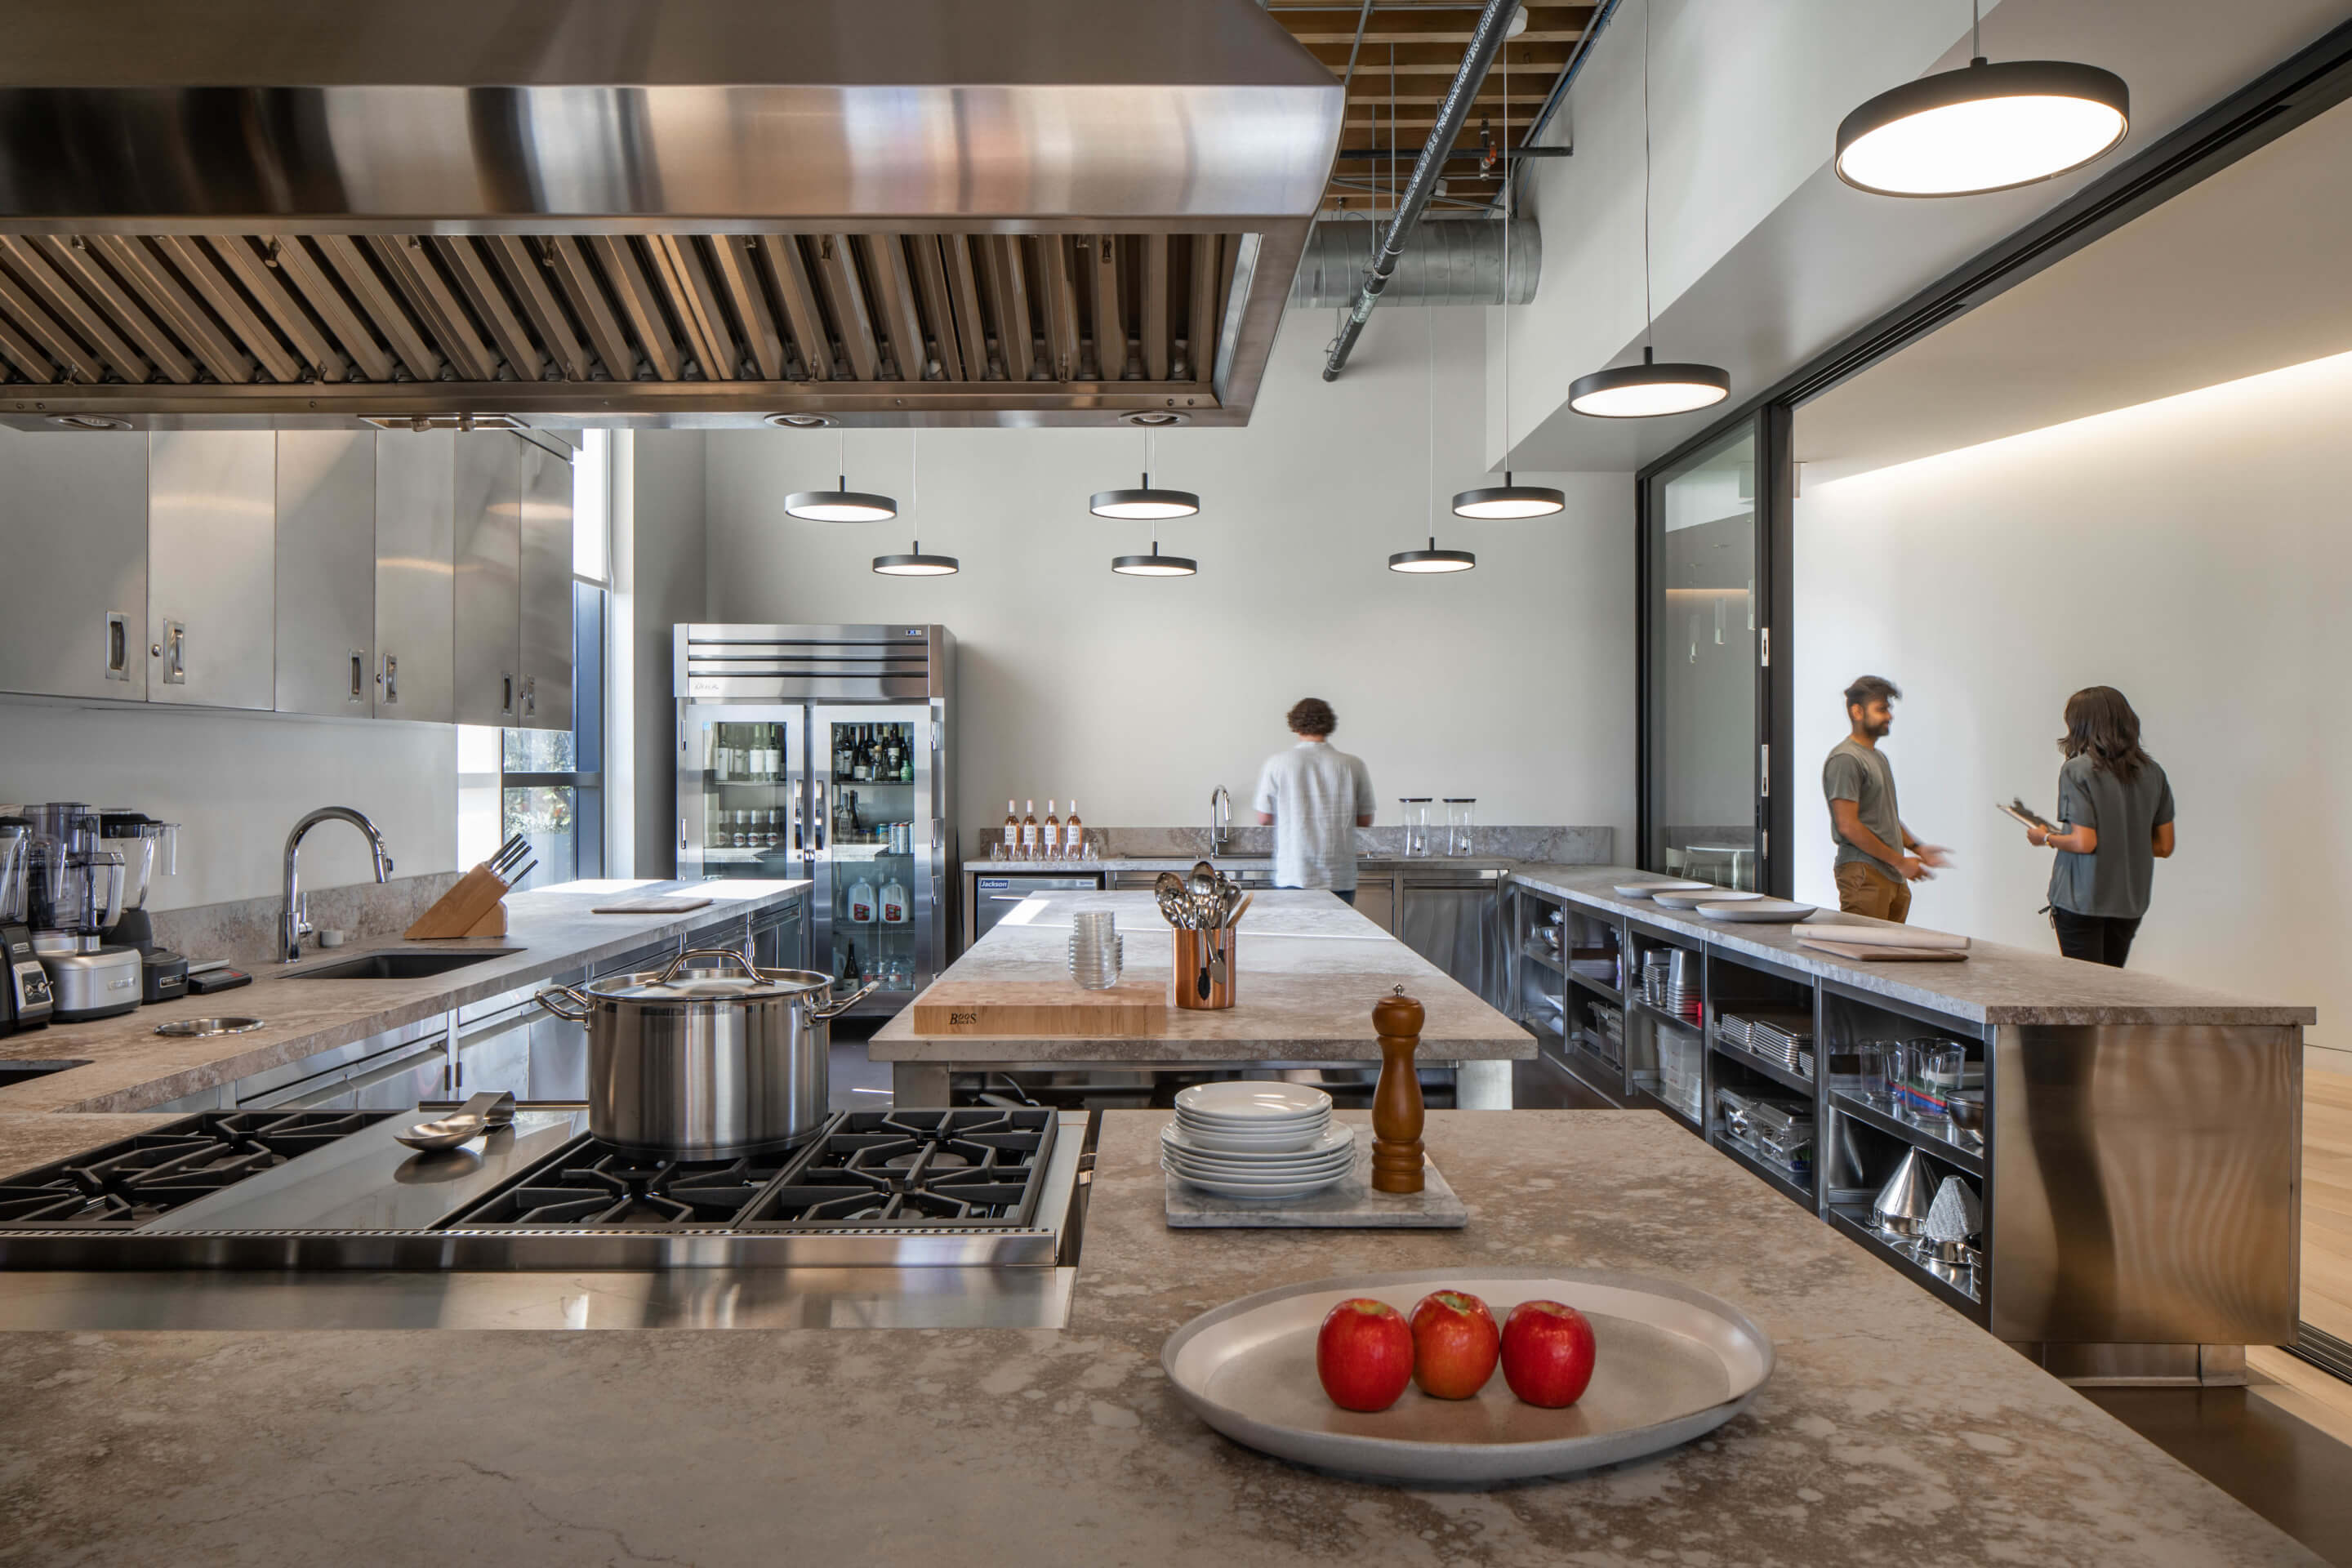 a plate of tomatoes sits inside of a large industrial kitchen